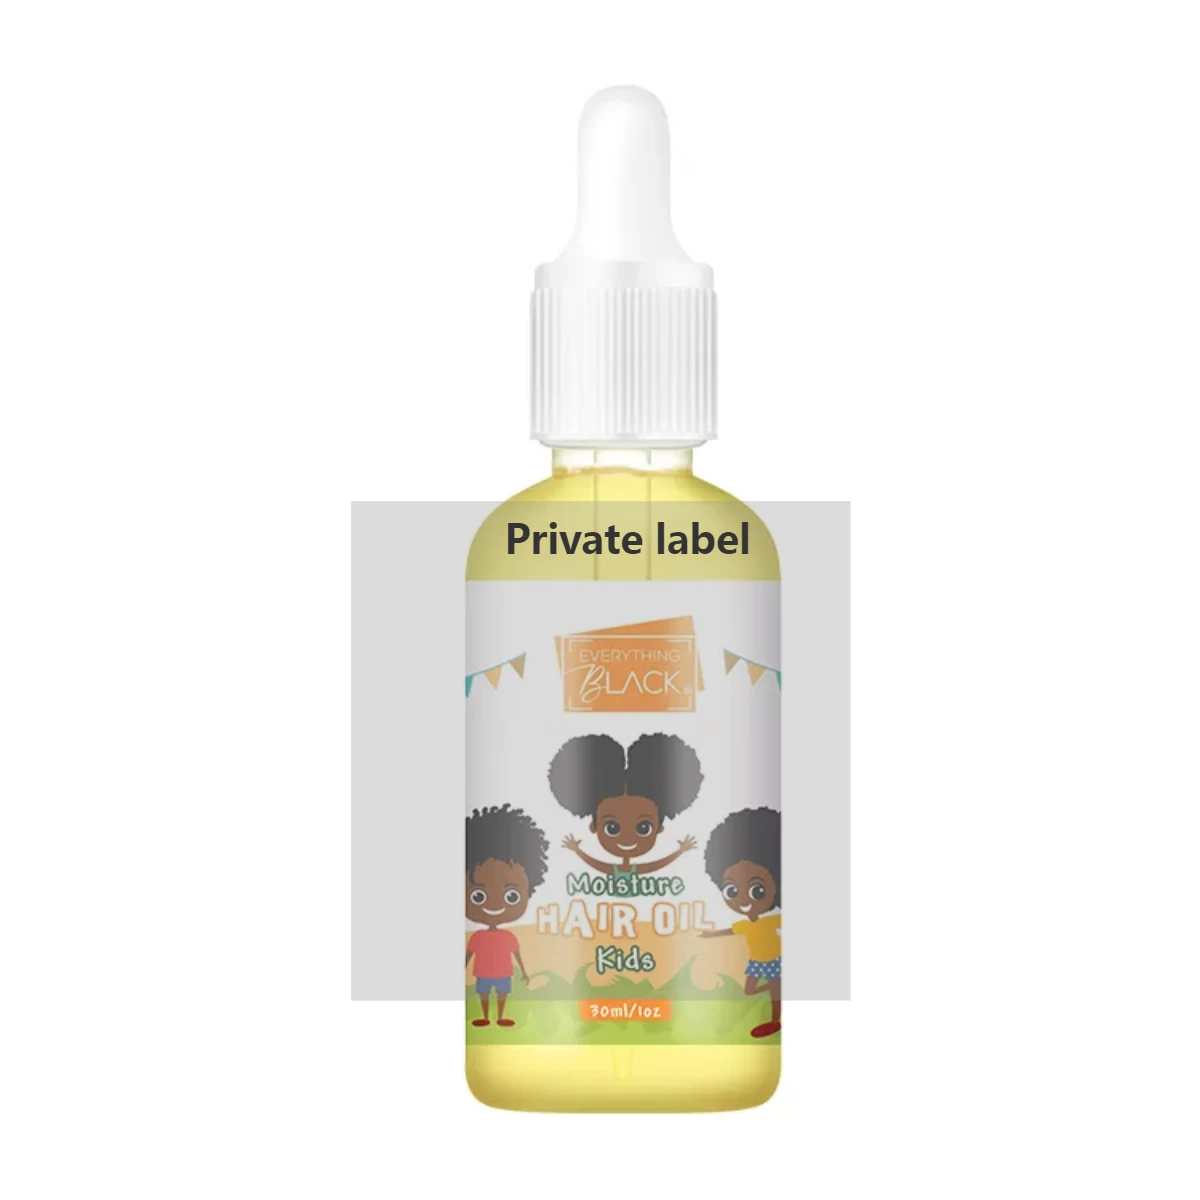 EVERYTHINGBLACK Private Label Protects And Smooth Natural Hair Care Sets For Kids Without Sulfate And Paraben